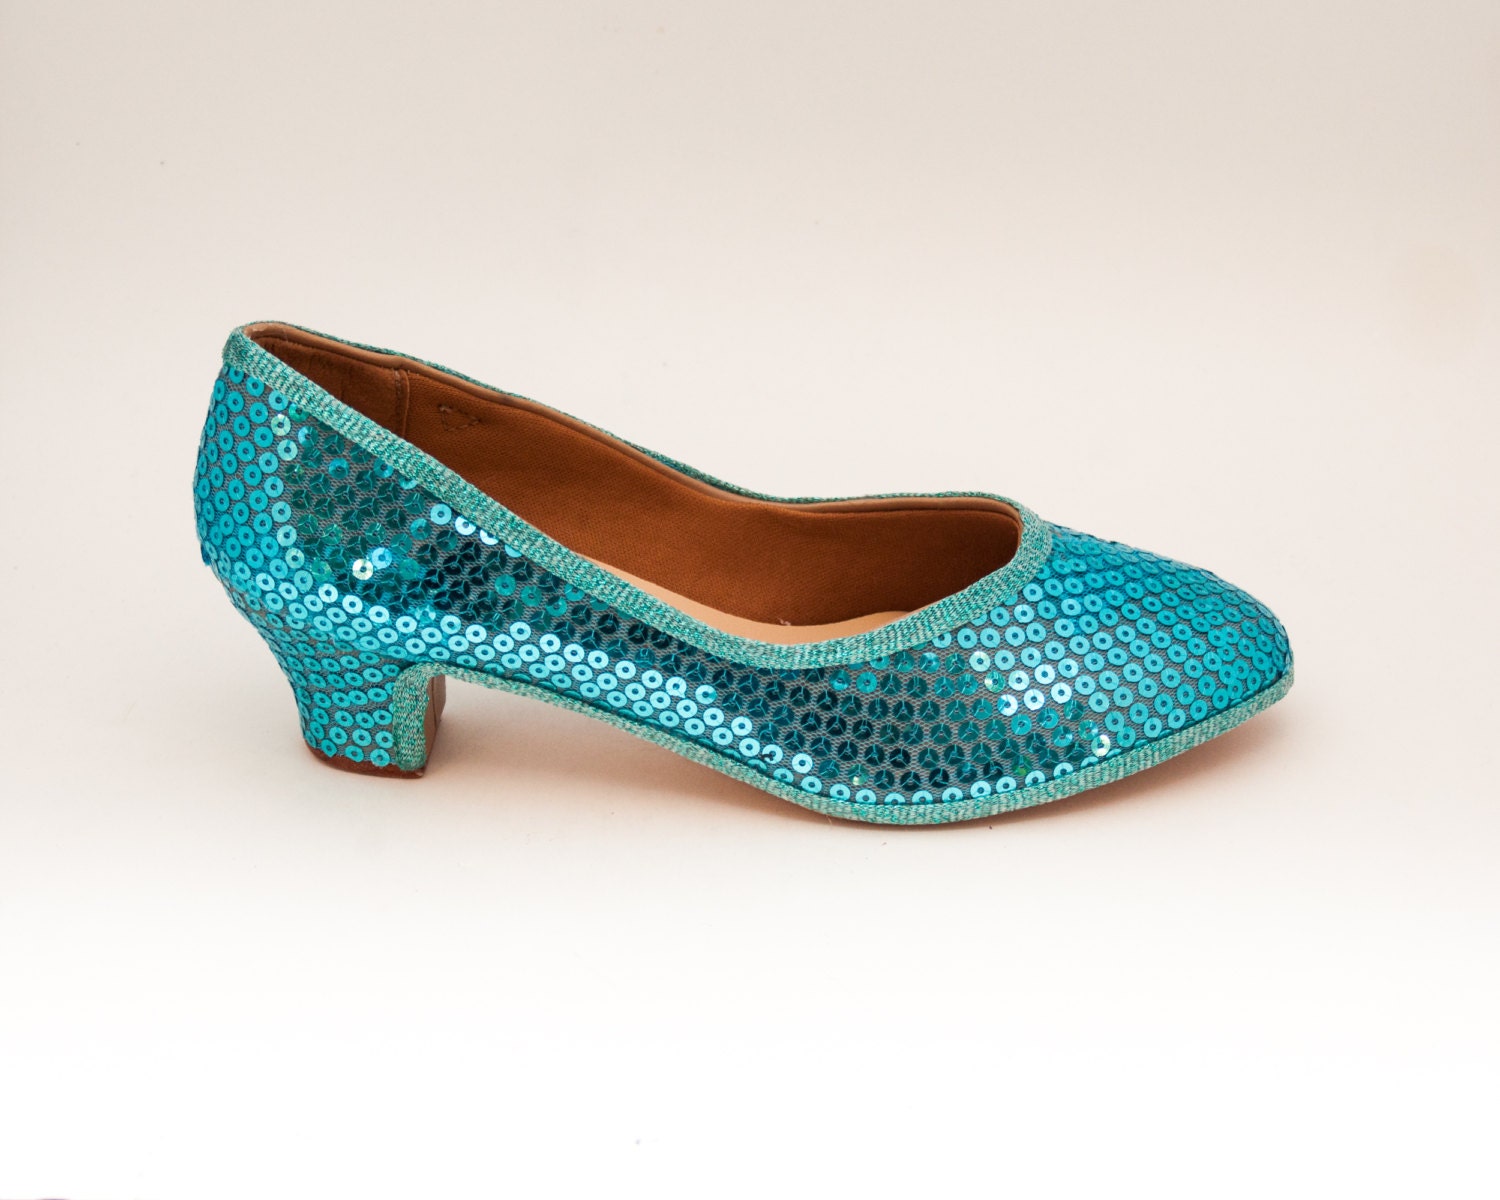 Sequin Sky Blue French High Heels Pumps Dress Shoes